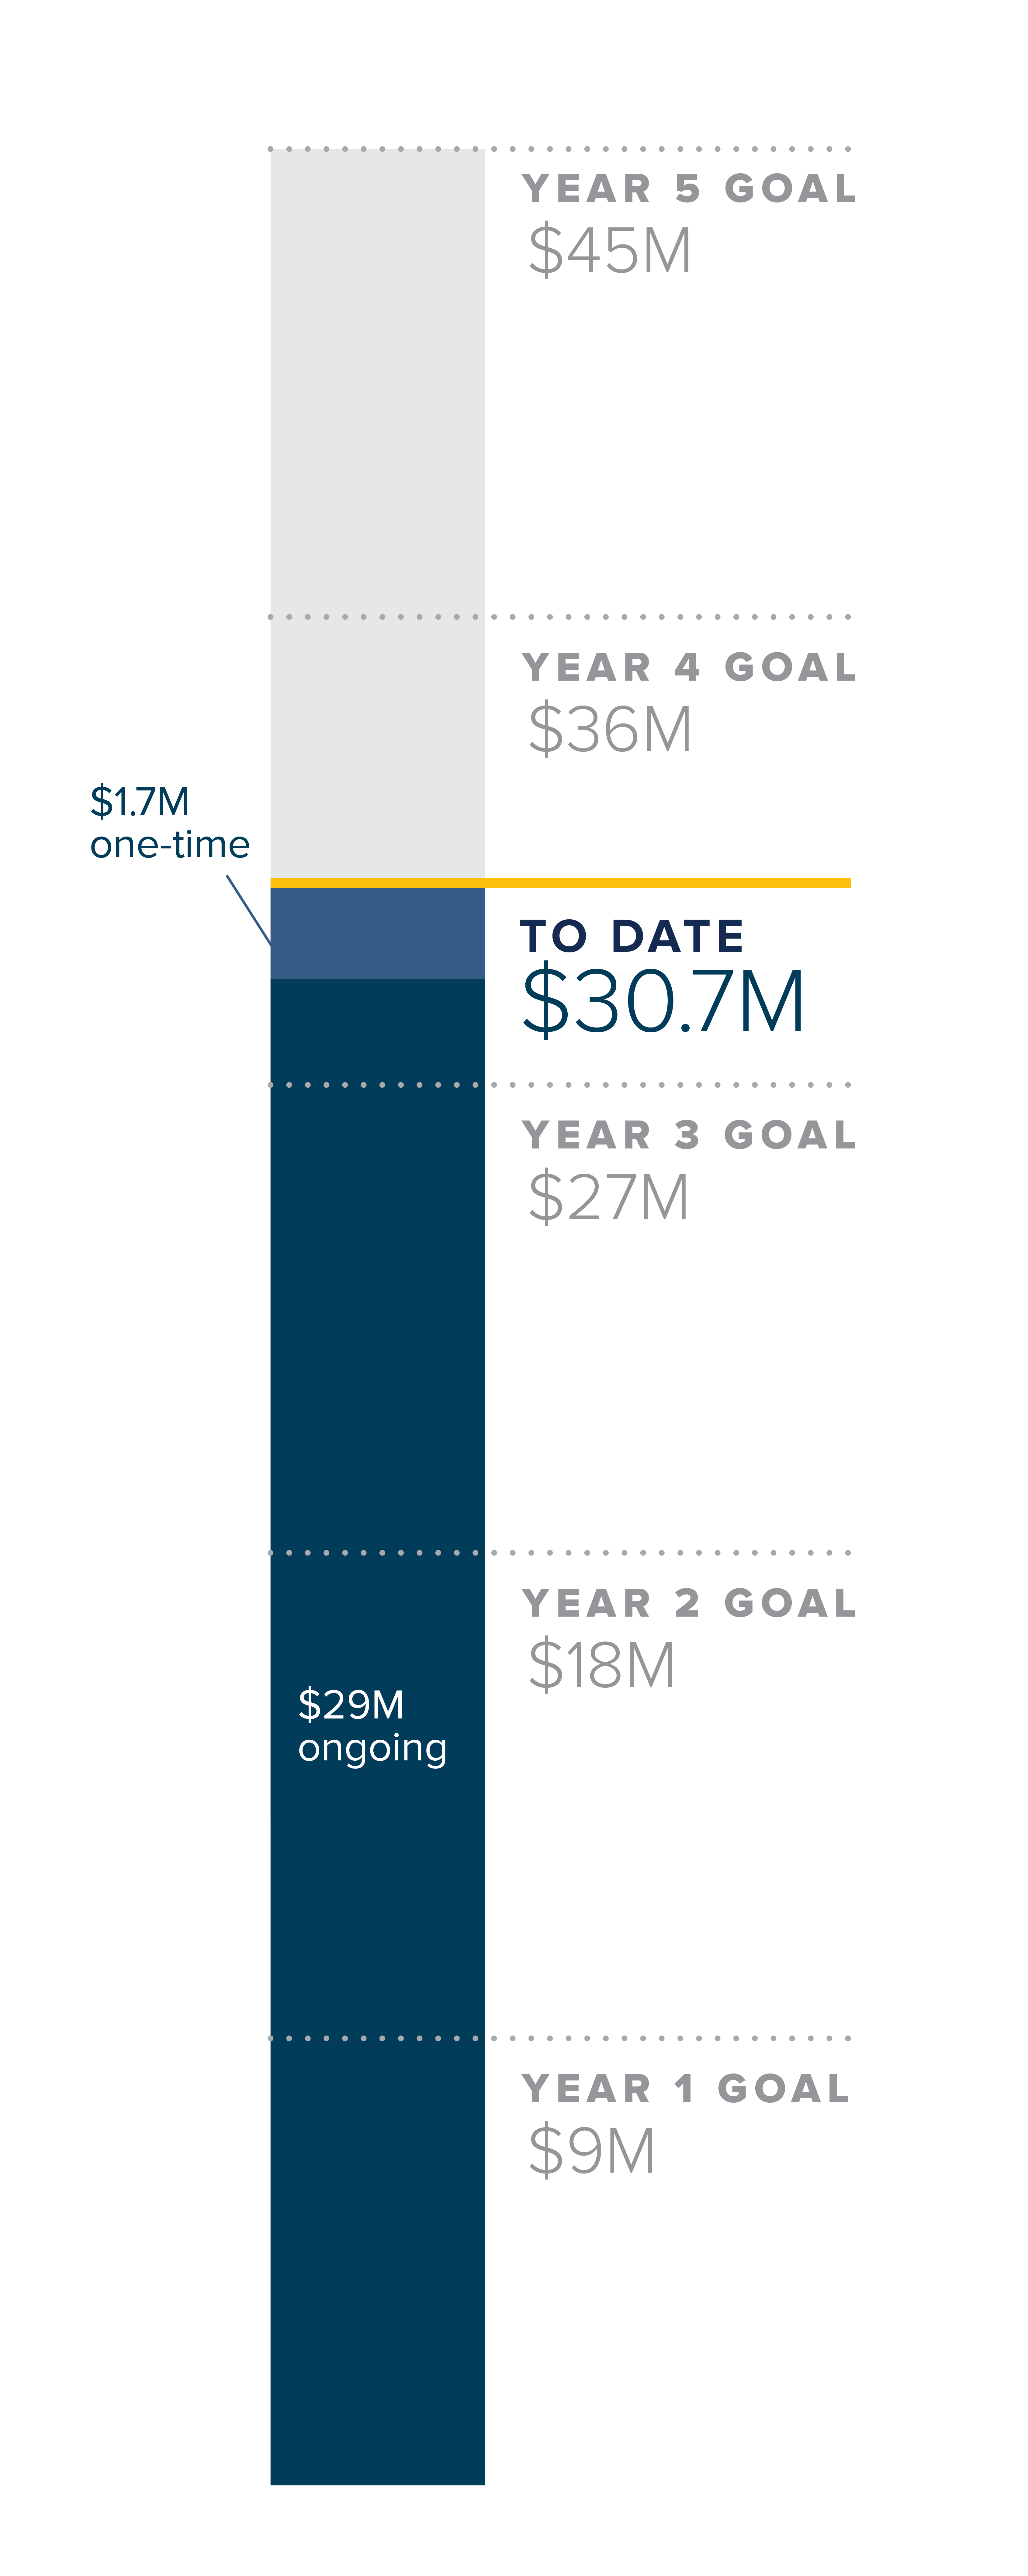 Unit Savings Target thermometer graphic. $30.7 million raised to date, of which $29 million is ongoing and $1.7 million is one-time.